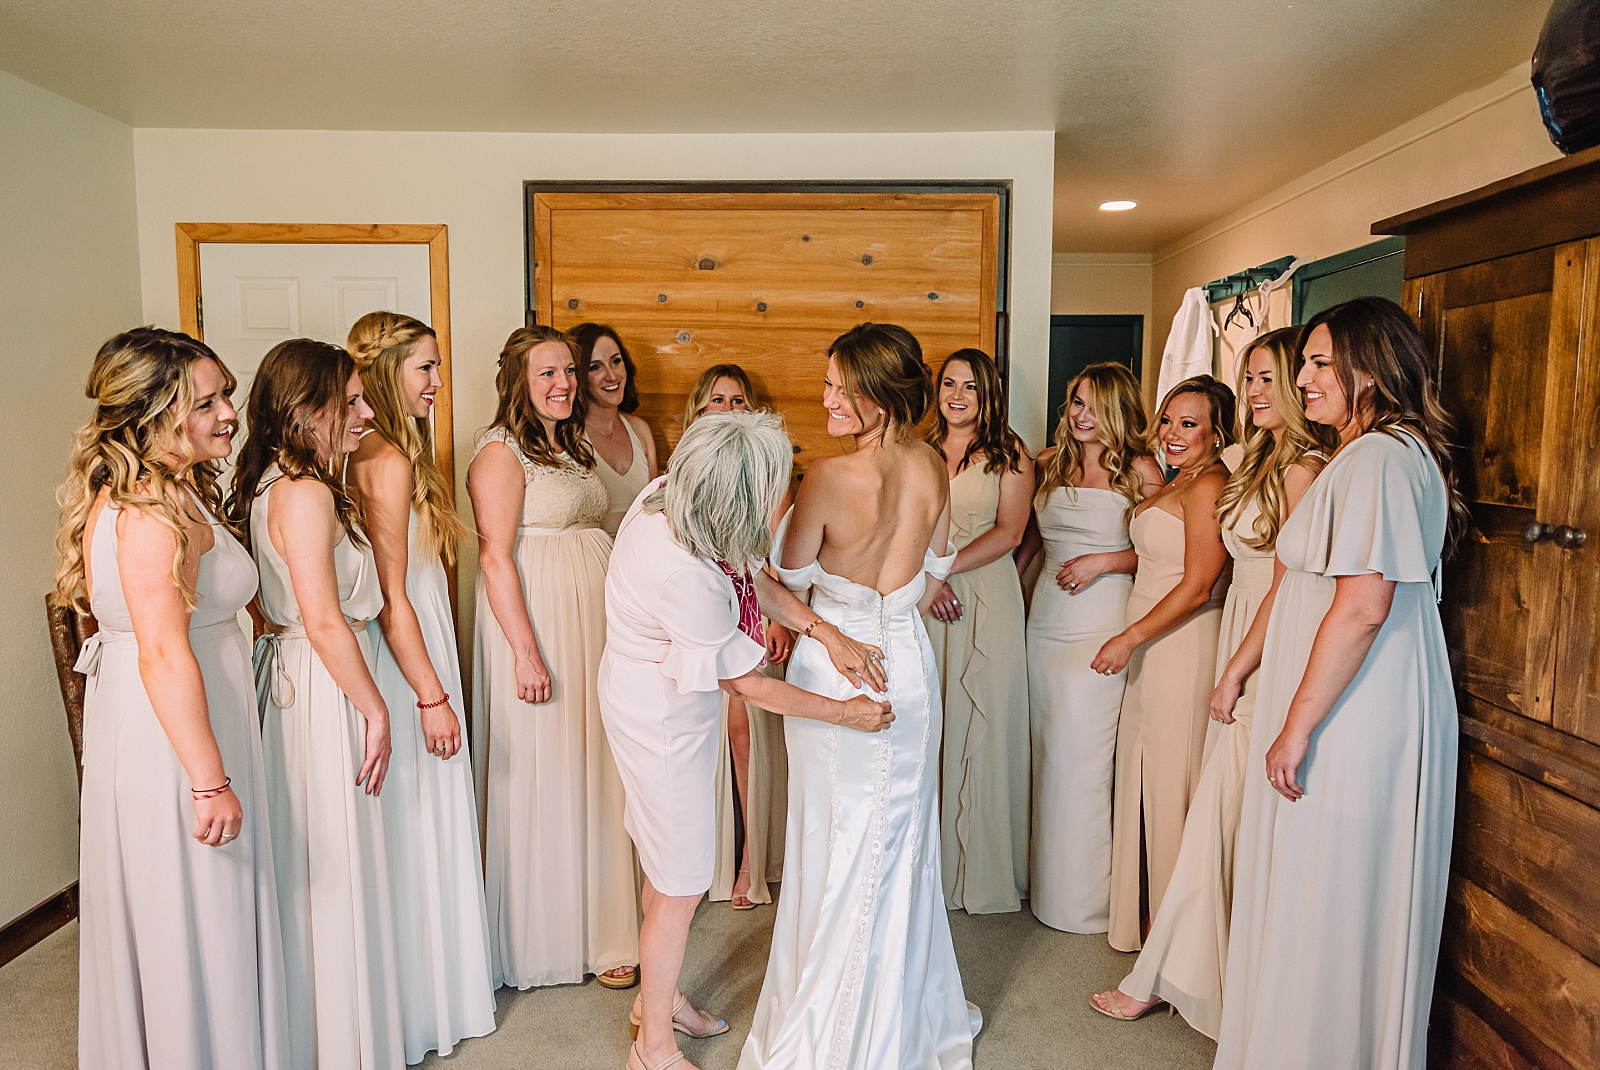 bride with mom and bridesmaids in bridal suite, Involve Bridesmaids in Getting Ready Photos